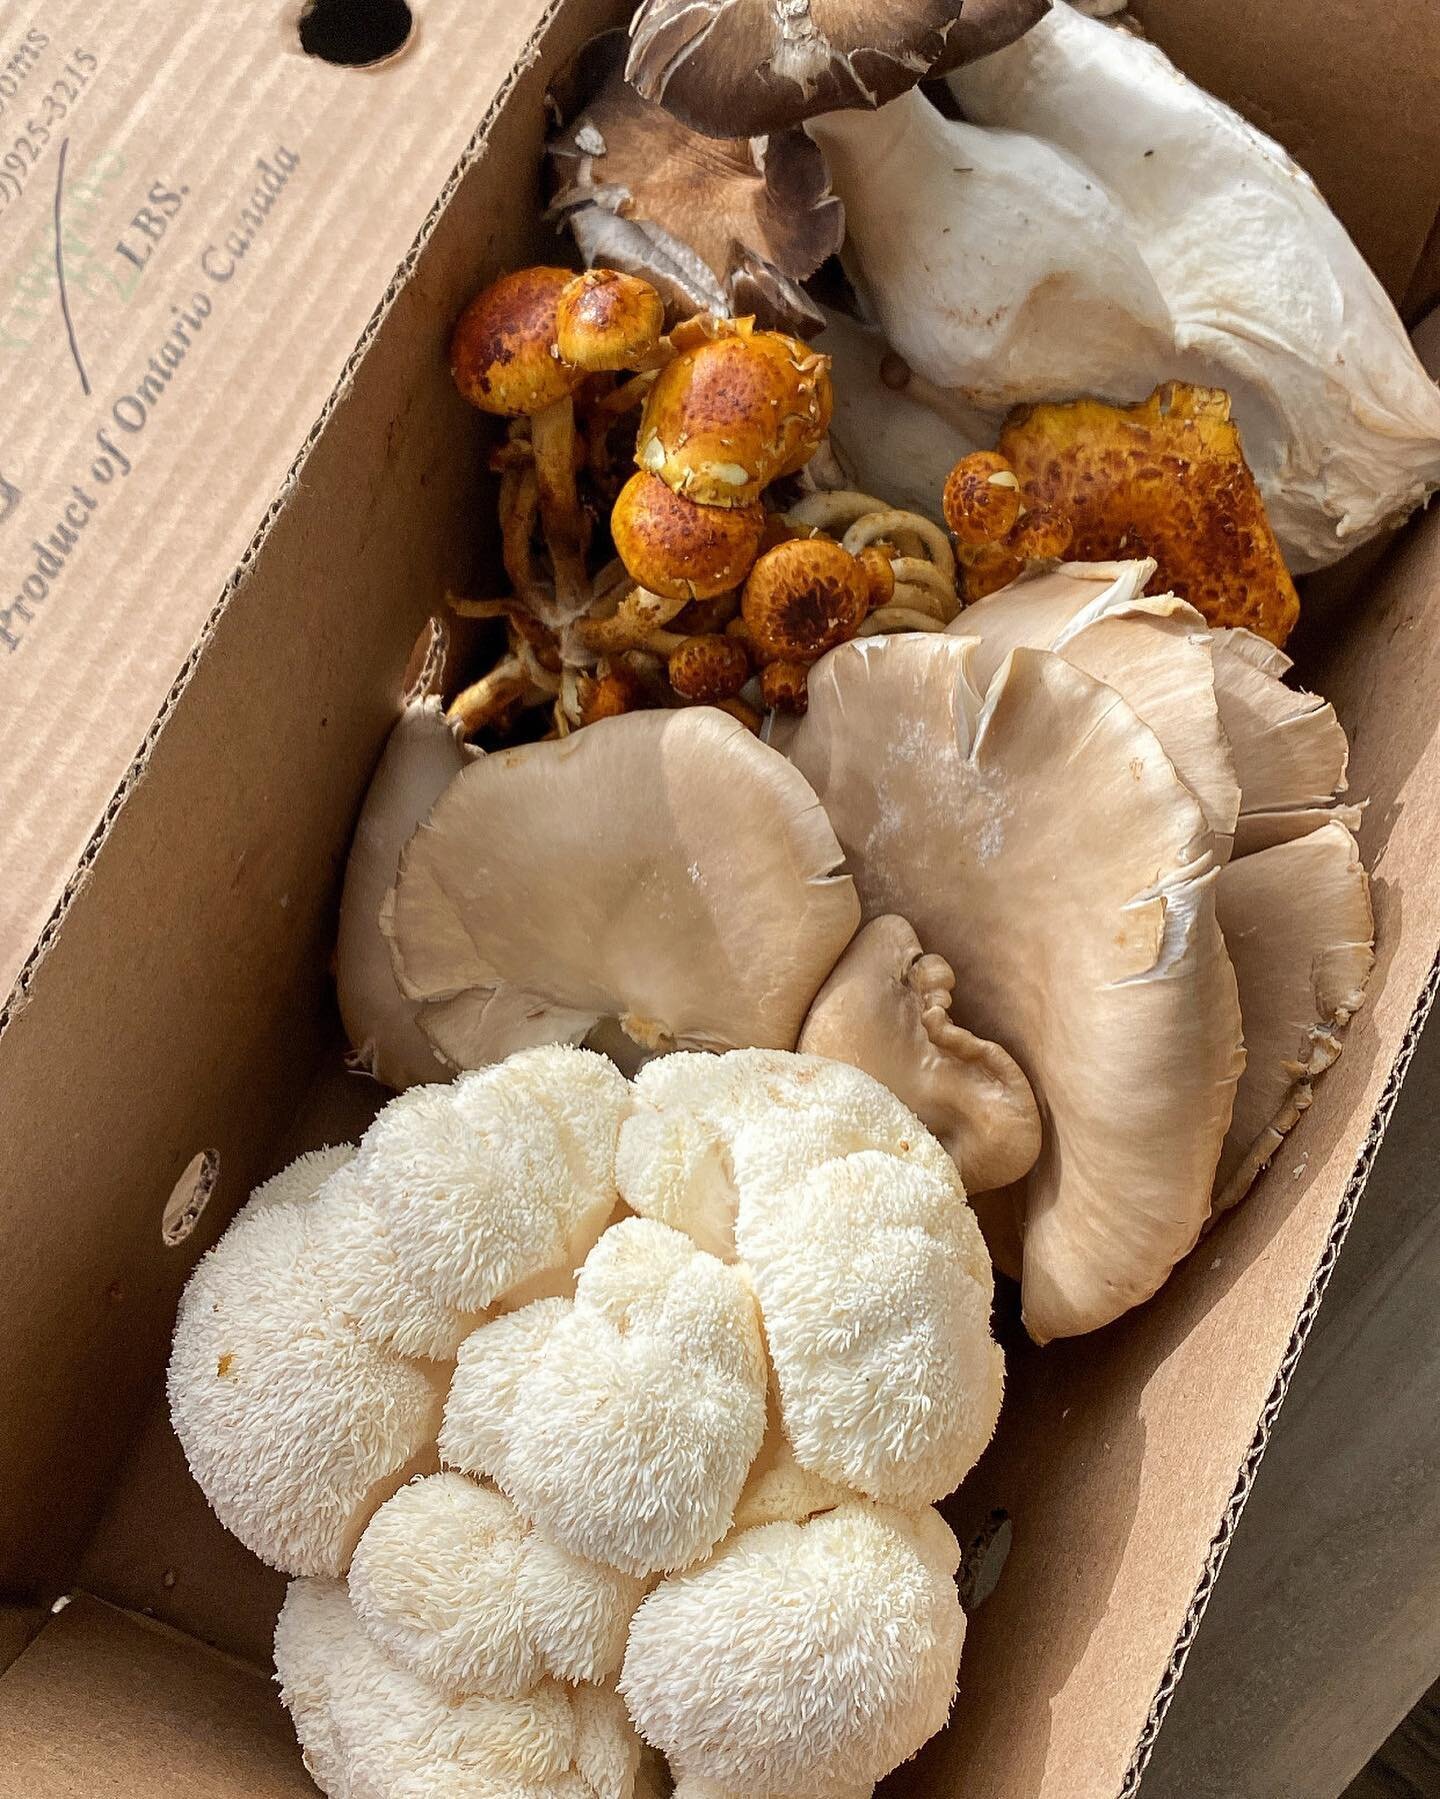 🍄 mushrooms are magical 🍄✨

There's nothing quite like fresh, locally grown mushrooms to elevate your cooking. Mushrooms are always a staple in my kitchen as they're an effortless way to impart a meaty texture and a rich, earthy flavour to any dish